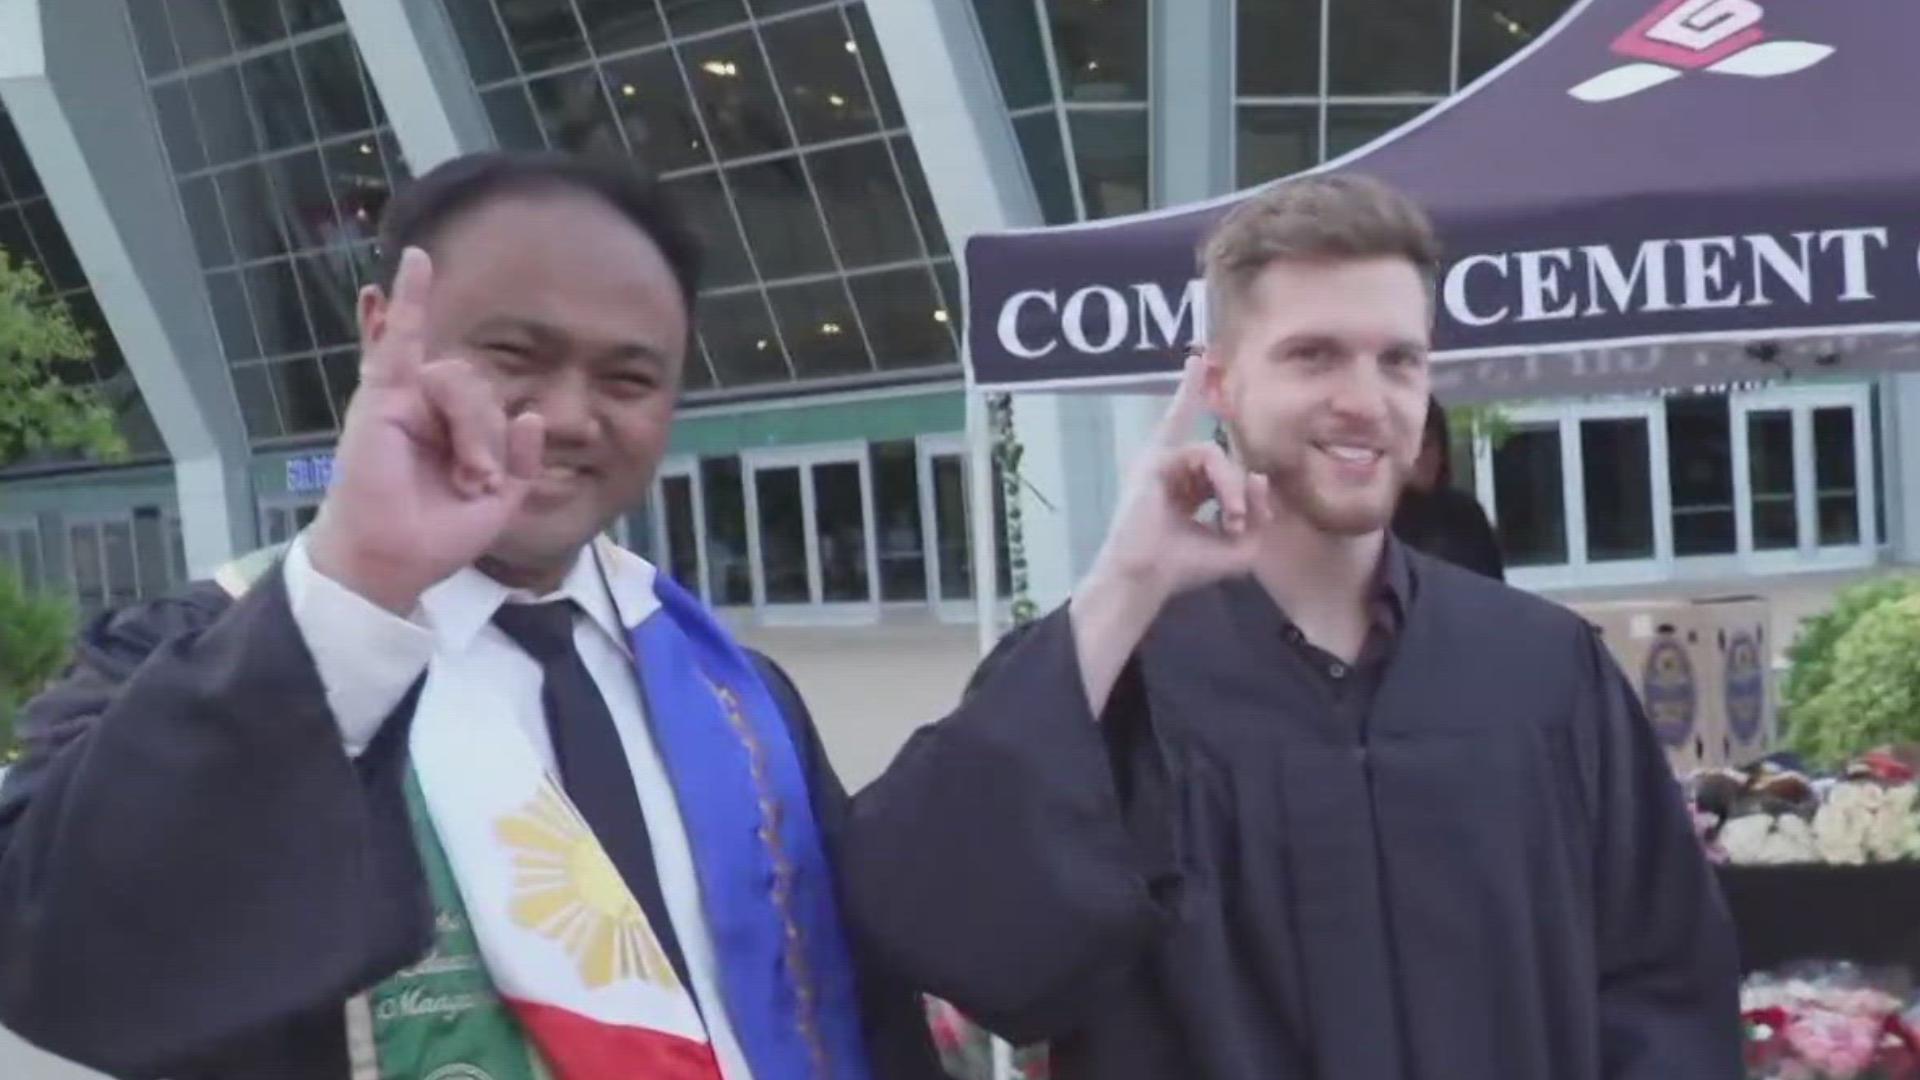 Three days of commencement ceremonies kicked off for Sac State grads this morning at Golden 1 Center in downtown Sacramento.